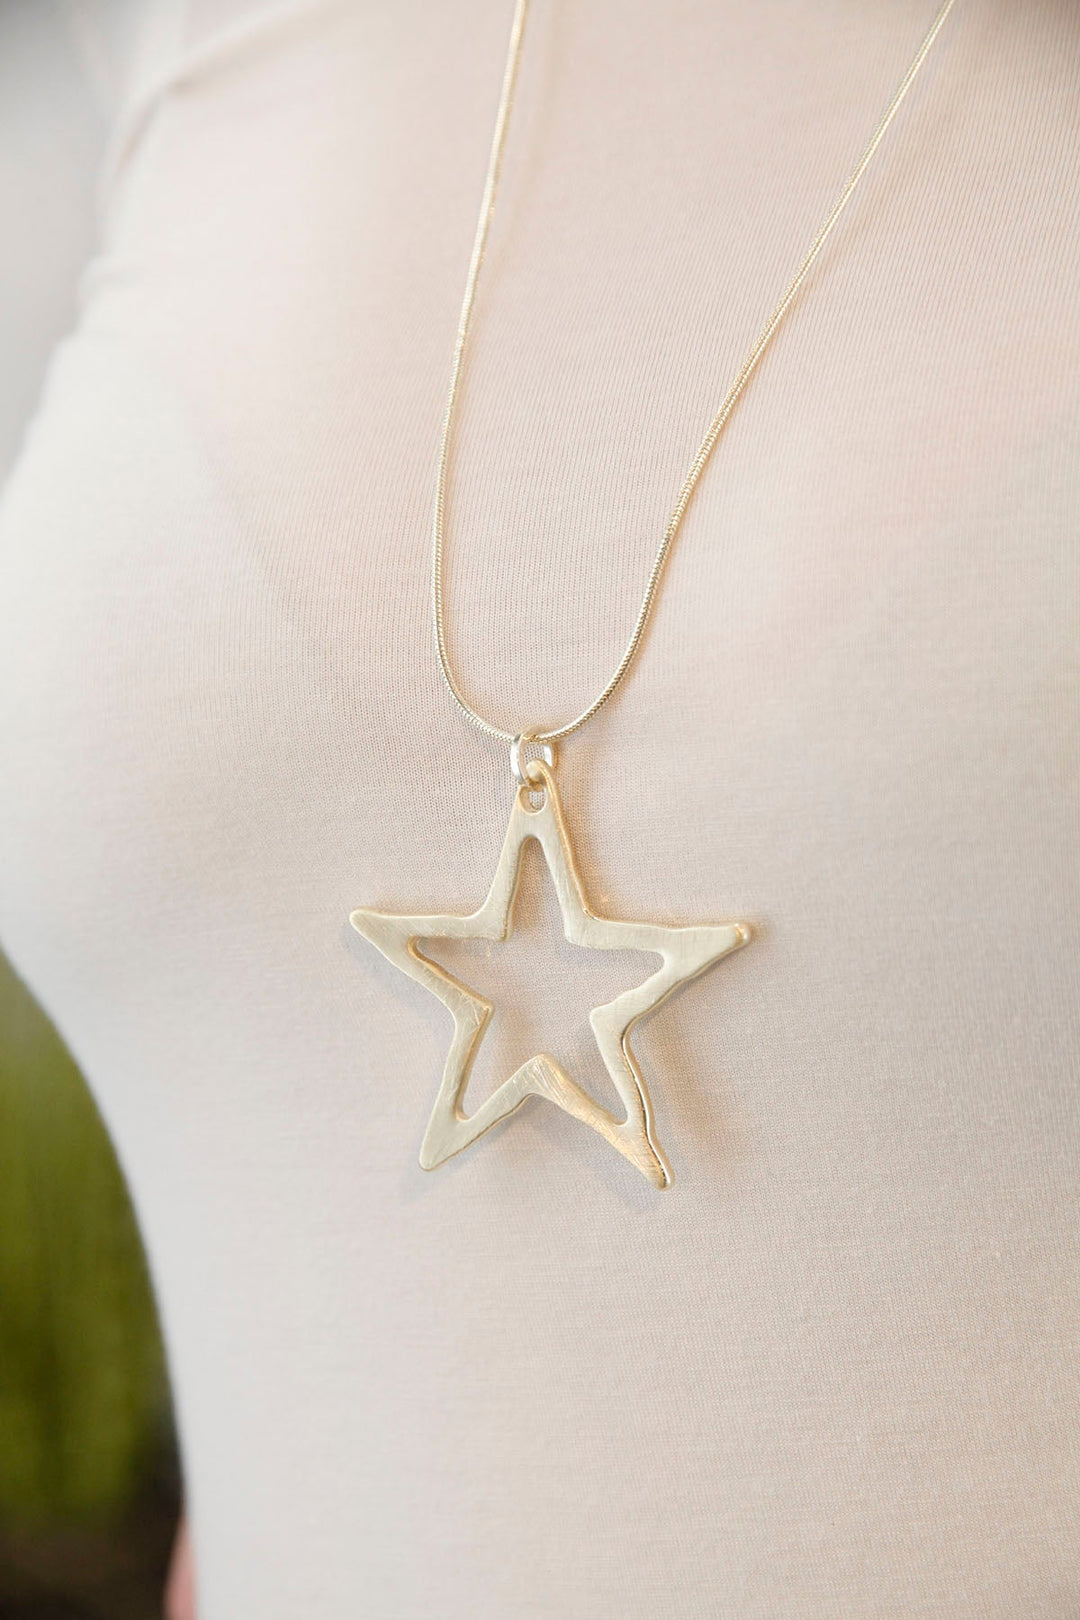 Gold Open Star Pendant Necklace - Goose Island